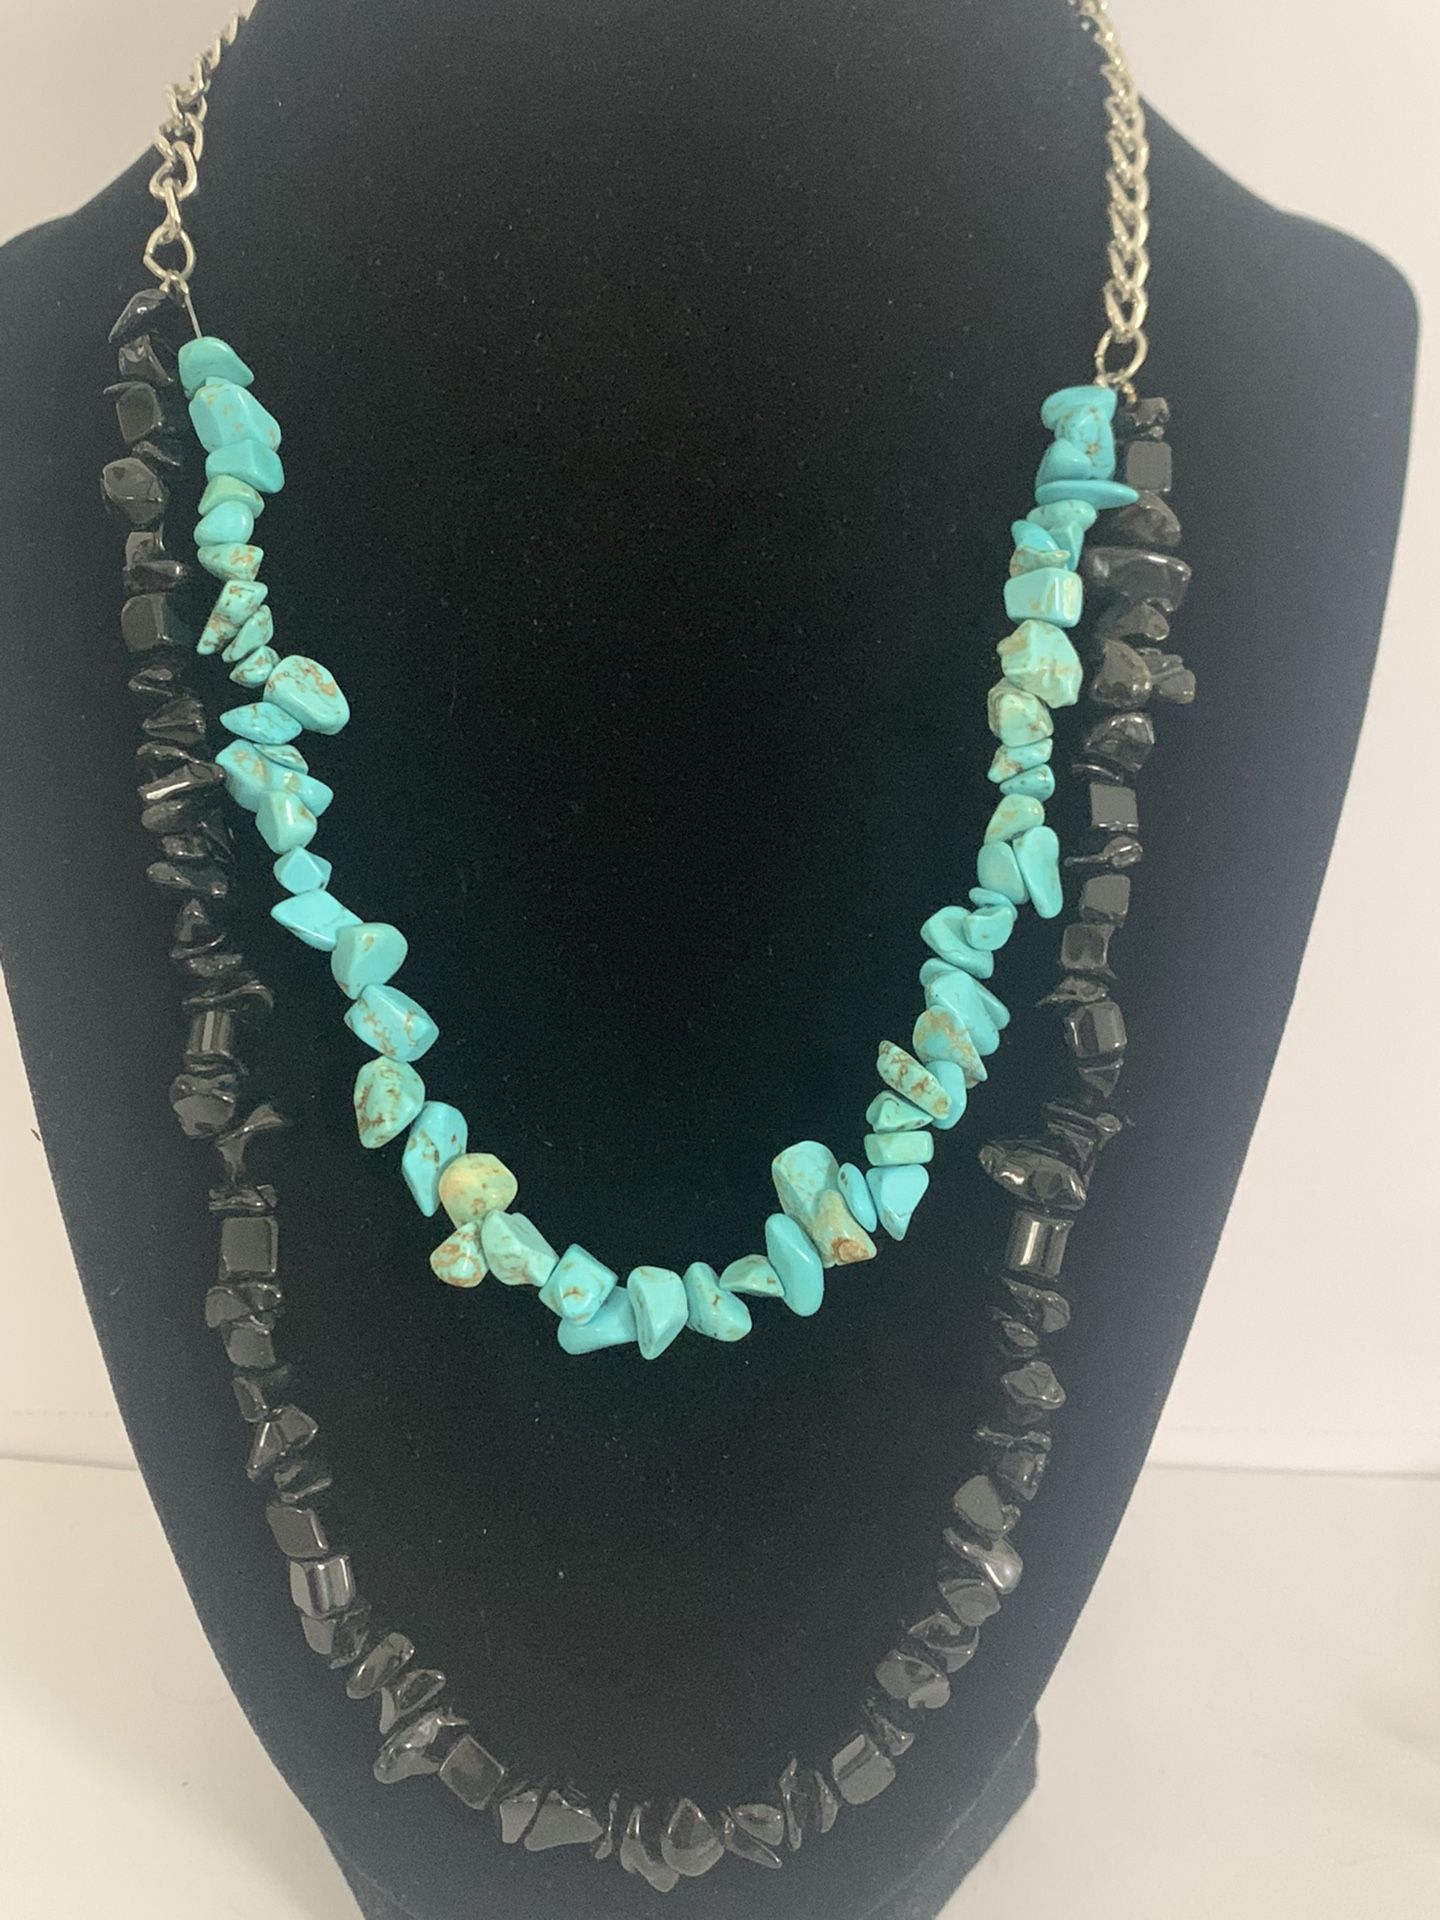 Black Onyx And Turquoise Necklace